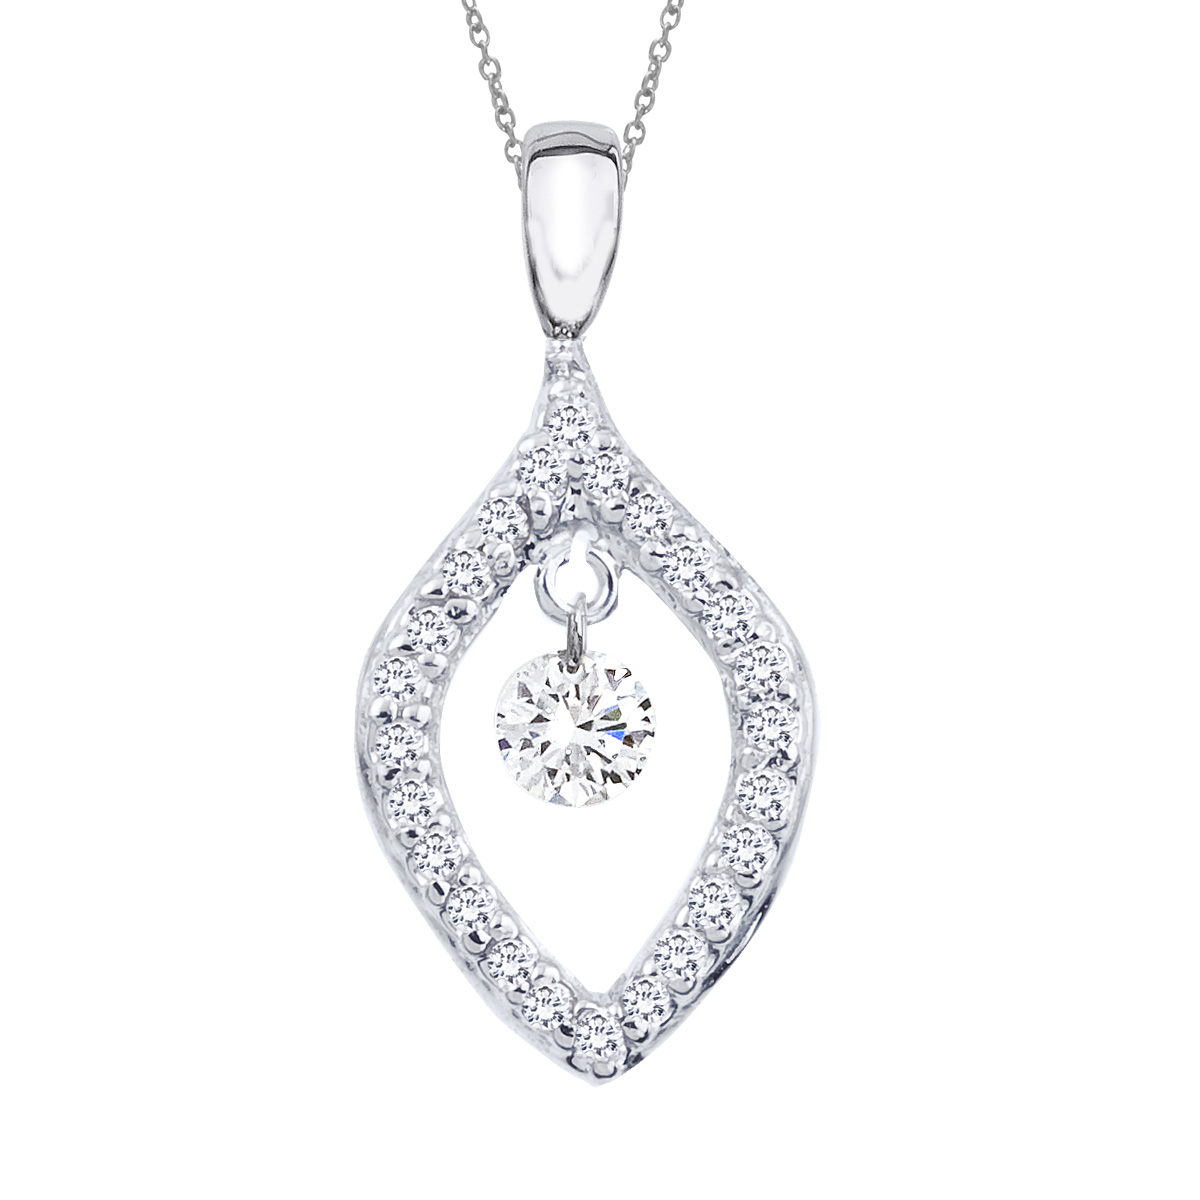 14k gold Dashinng Diamonds pendant with 0.17 total ct diamonds. The center dangling diamond dances and shimmers with every heartbeat.